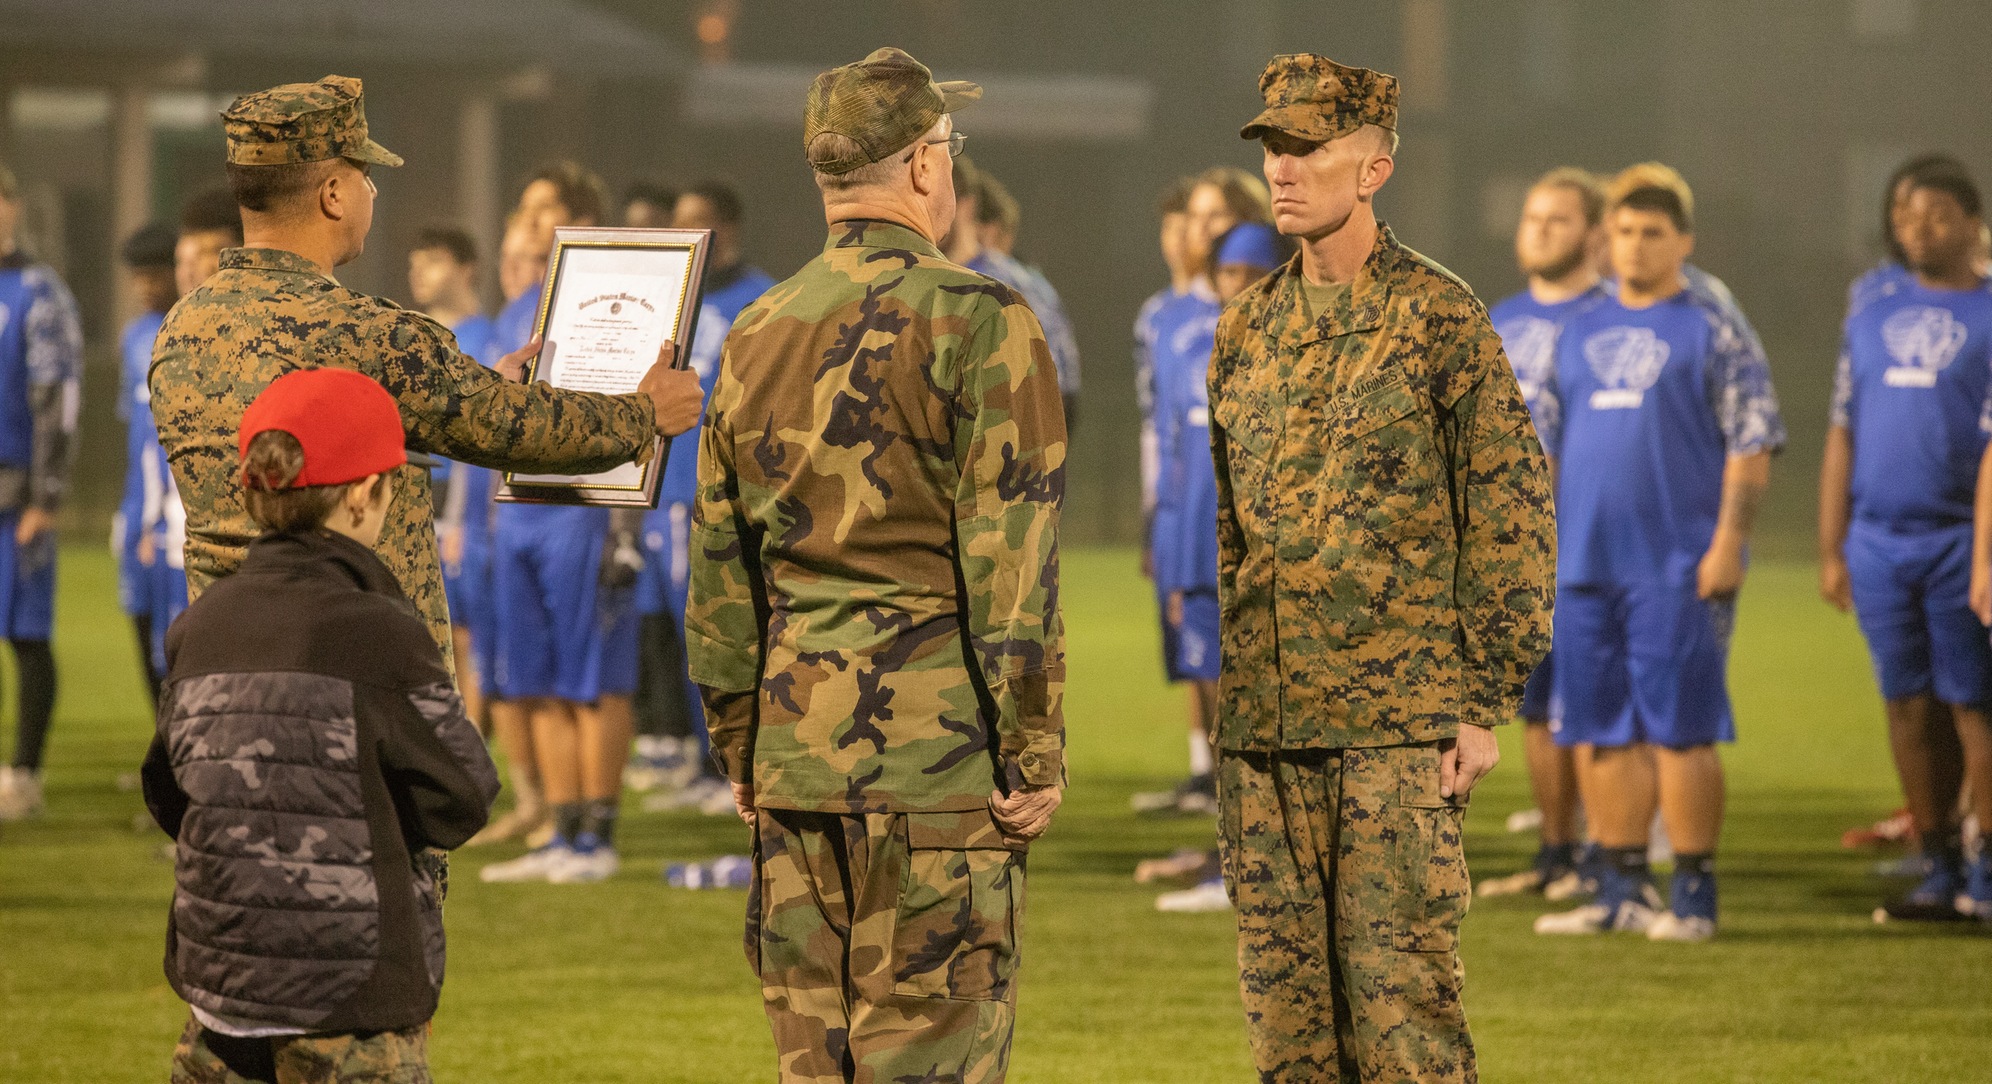 Coach Randy Finley Promoted to United States Marine Corps Gunnery Sergeant in Ceremony at Brevard College